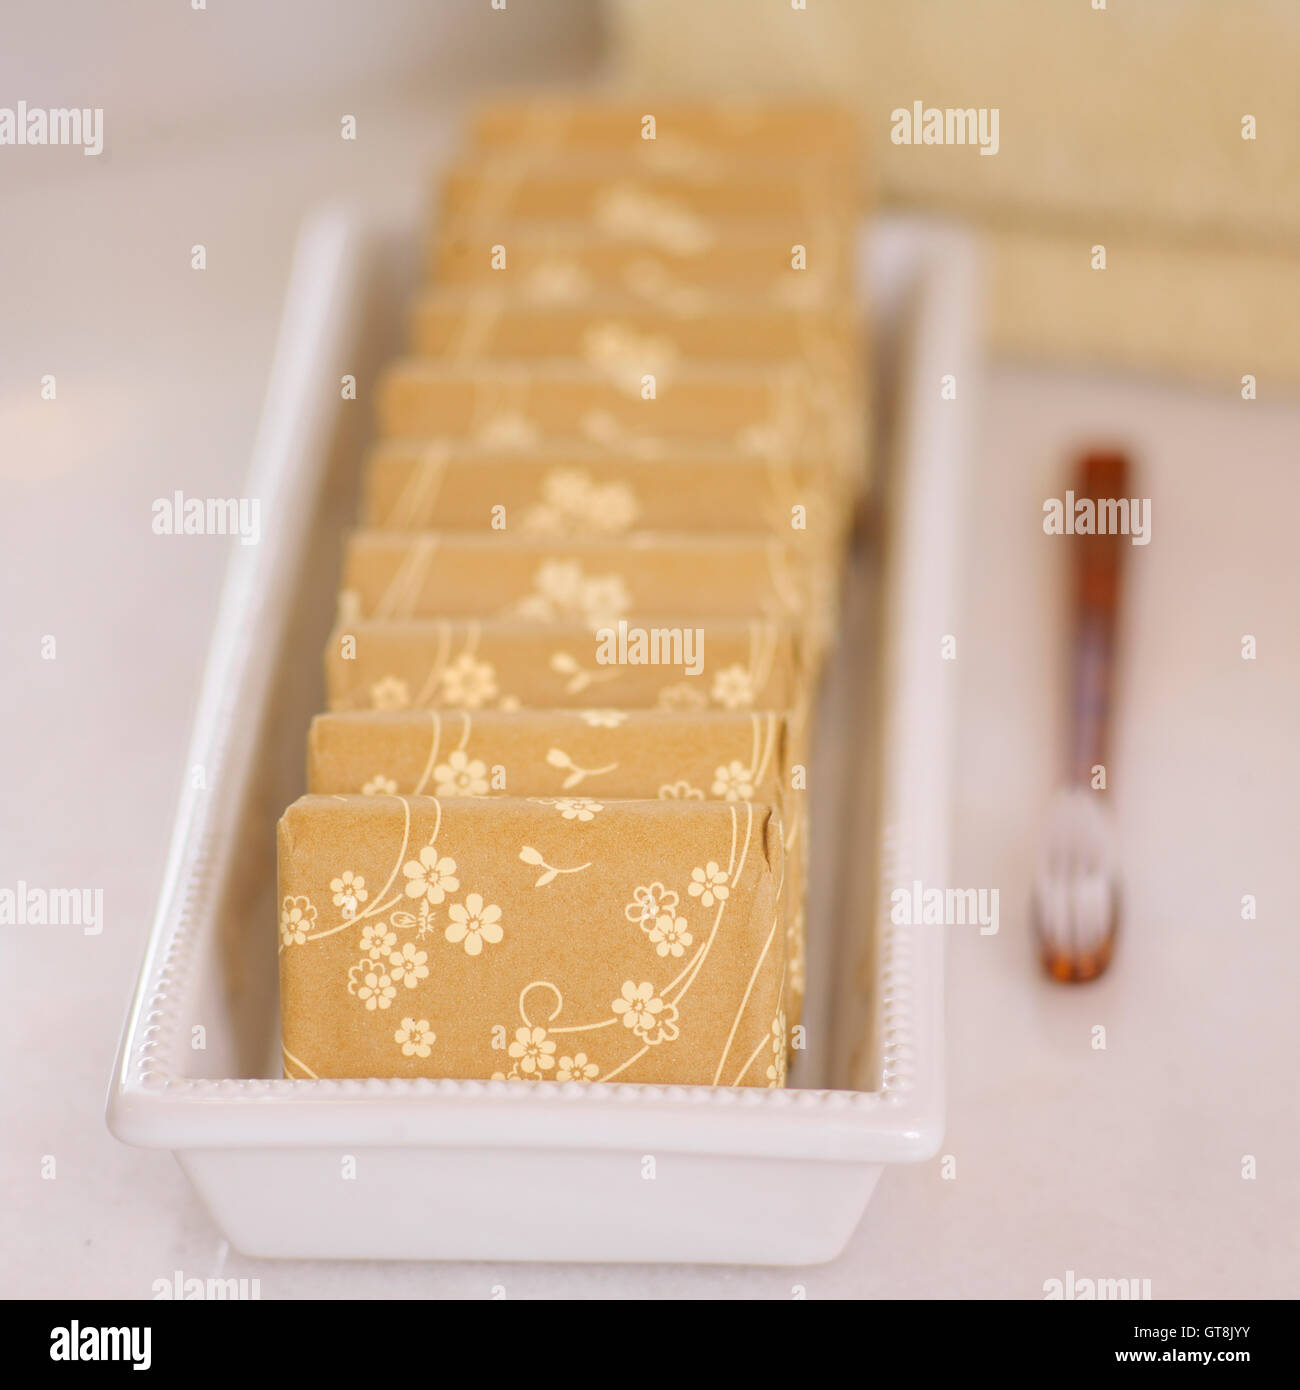 Close-up of Floral Wrapped Bars of Soap in Dish with Towels and Toothbrush Stock Photo